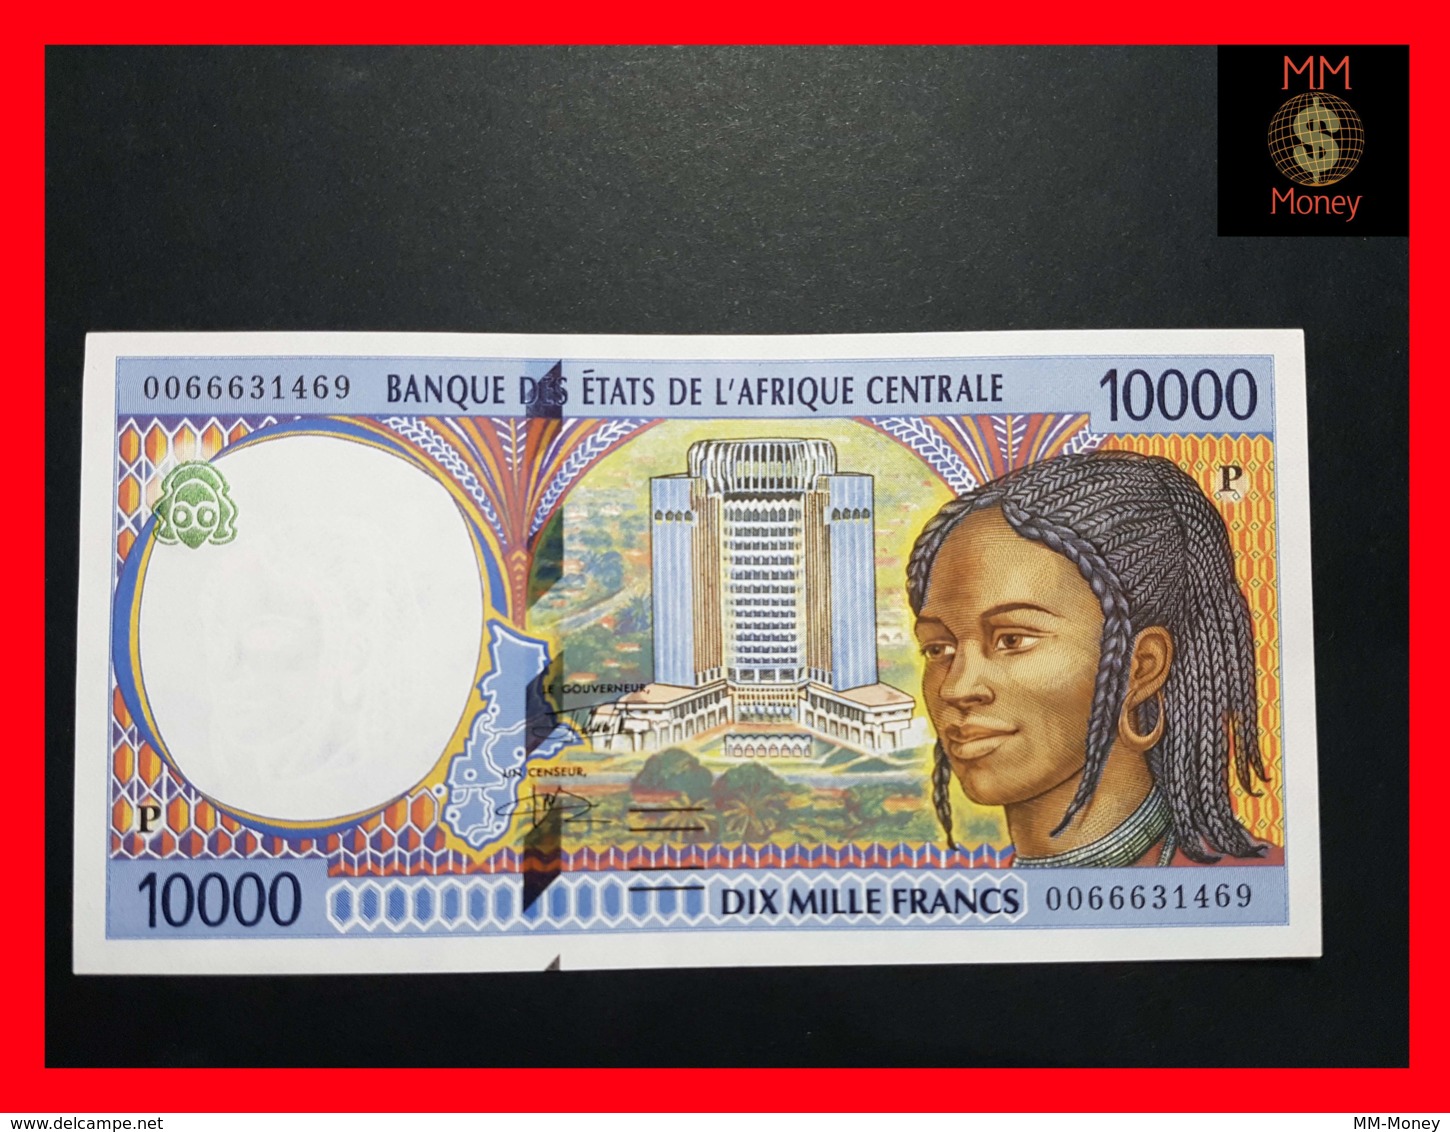 CENTRAL AFRICAN STATES  "P"  CHAD 10.000 10000 Francs 2000  P. 605 P F  AUNC - Central African States